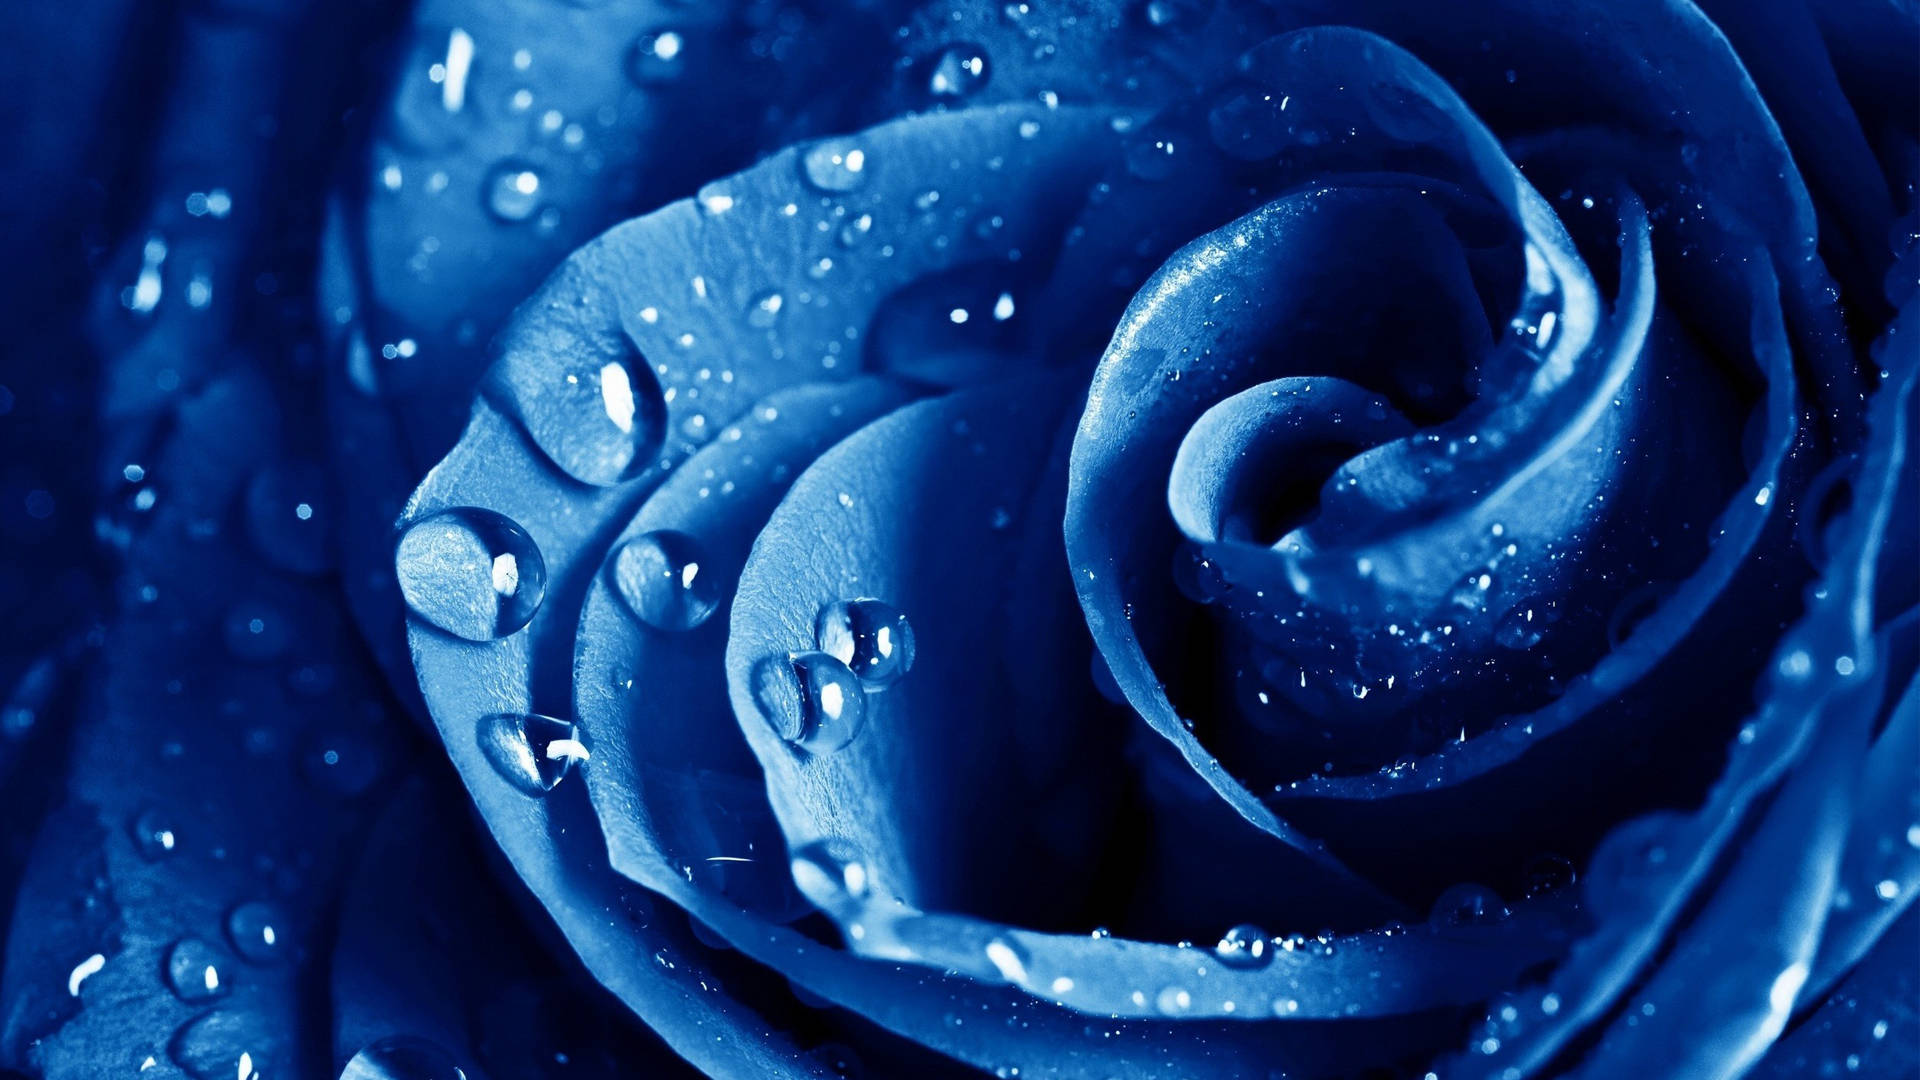 Neon Blue Aesthetic Rose Water Droplets Wallpaper